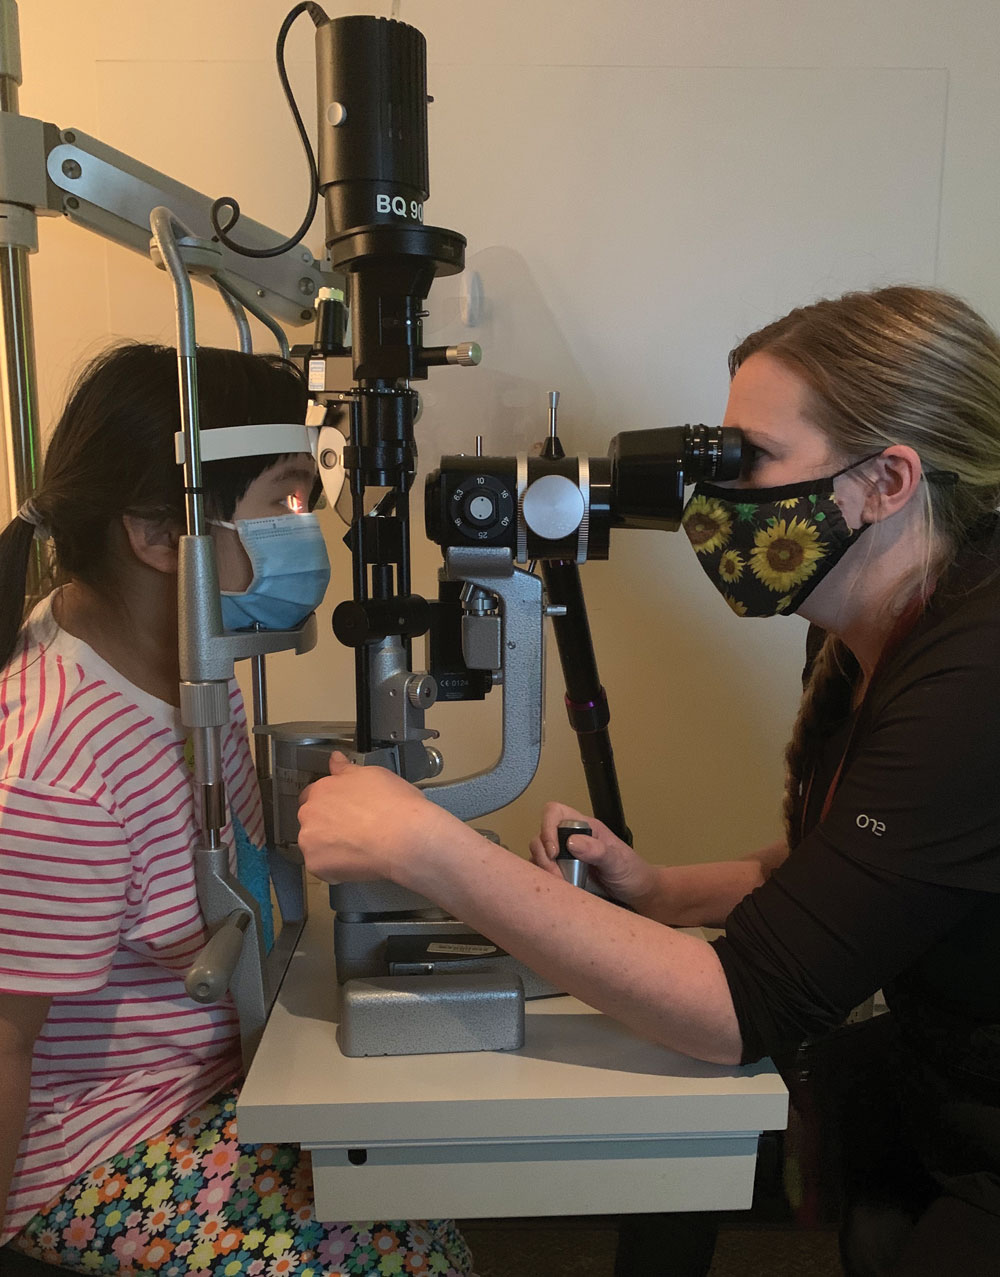 As the myopia population grows, adding mitigation efforts to your practice gives you the opportunity to provide long-term benefits for your patients.